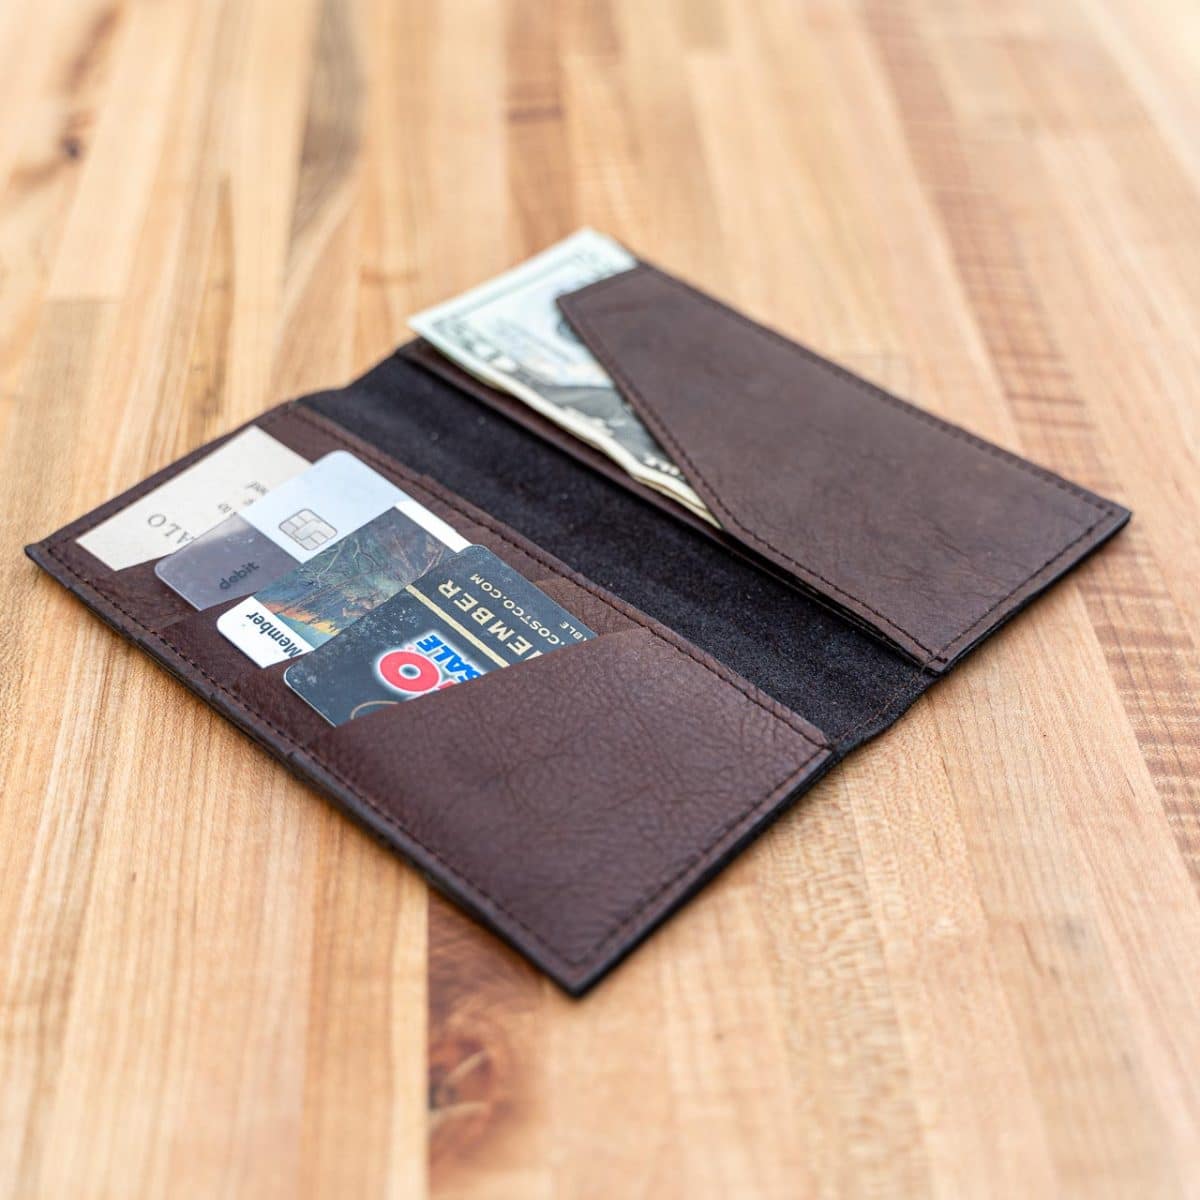 https://buffalobillfoldcompany.com/wp-content/uploads/2012/12/Leather-Checkbook-Wallet-Made-in-USA-Inside-1200x1200-cropped.jpg